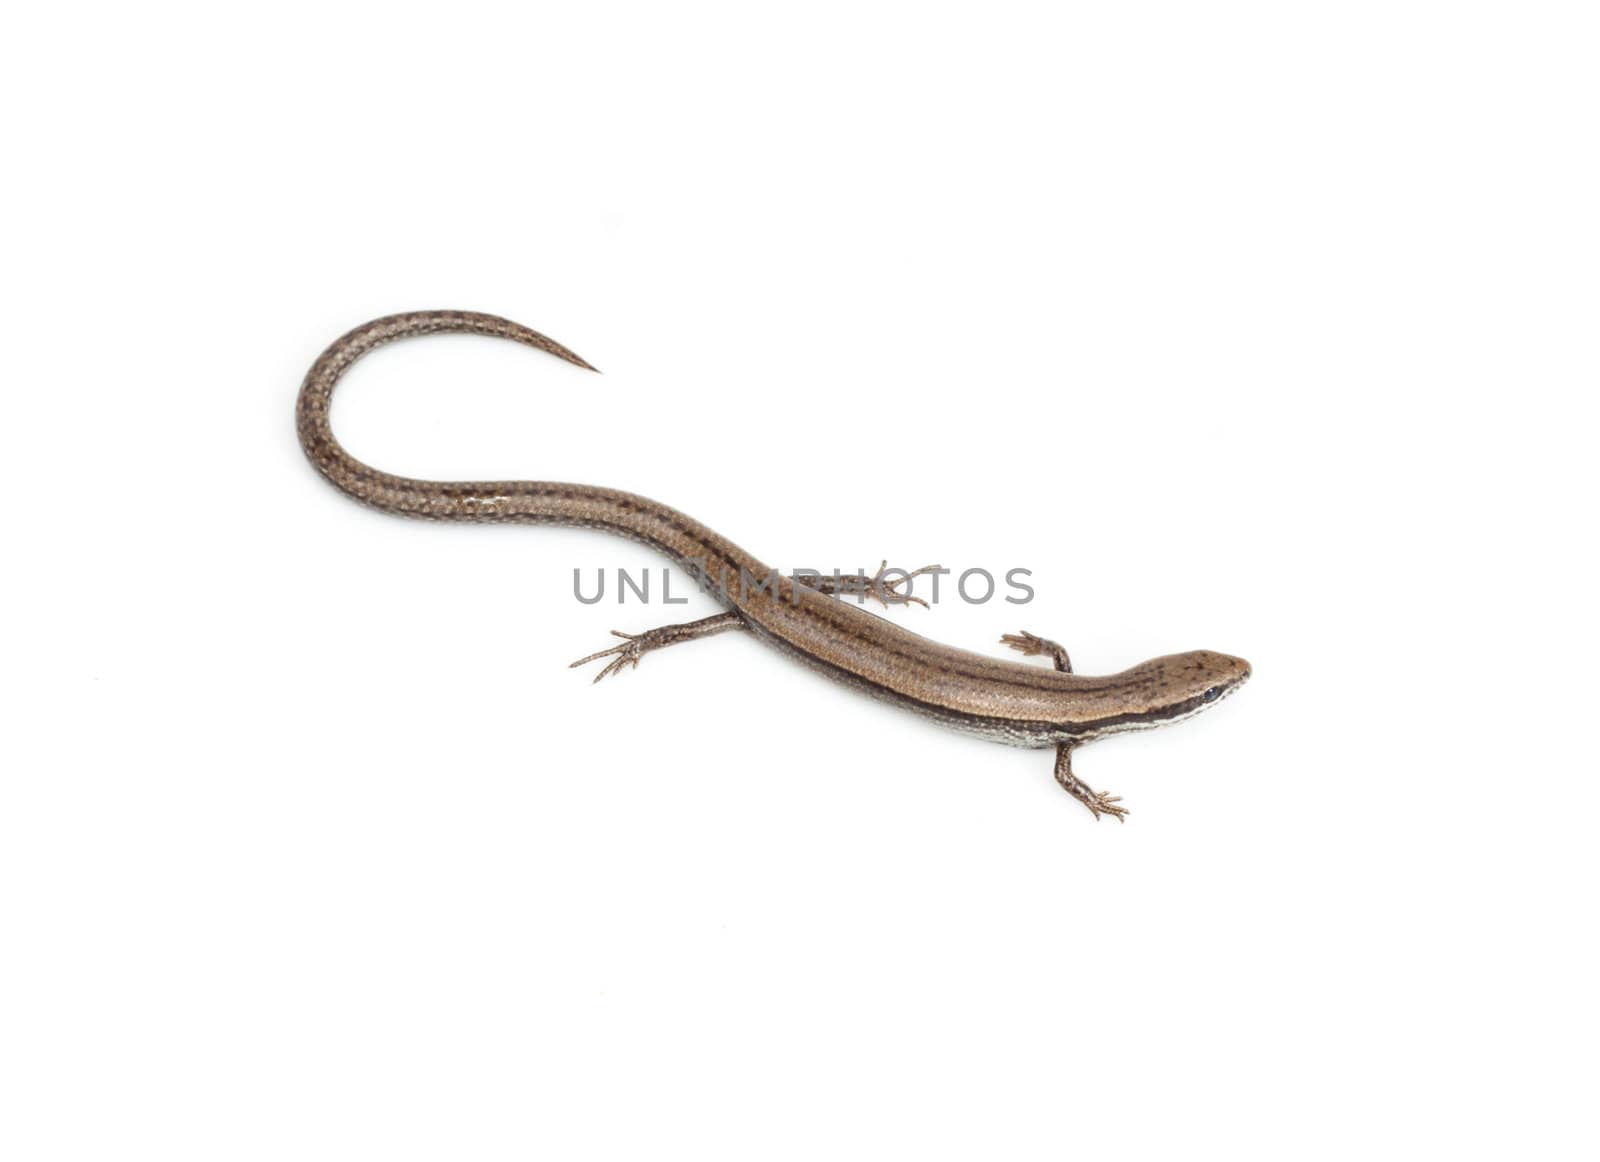 One small lizard on a white background  by schankz